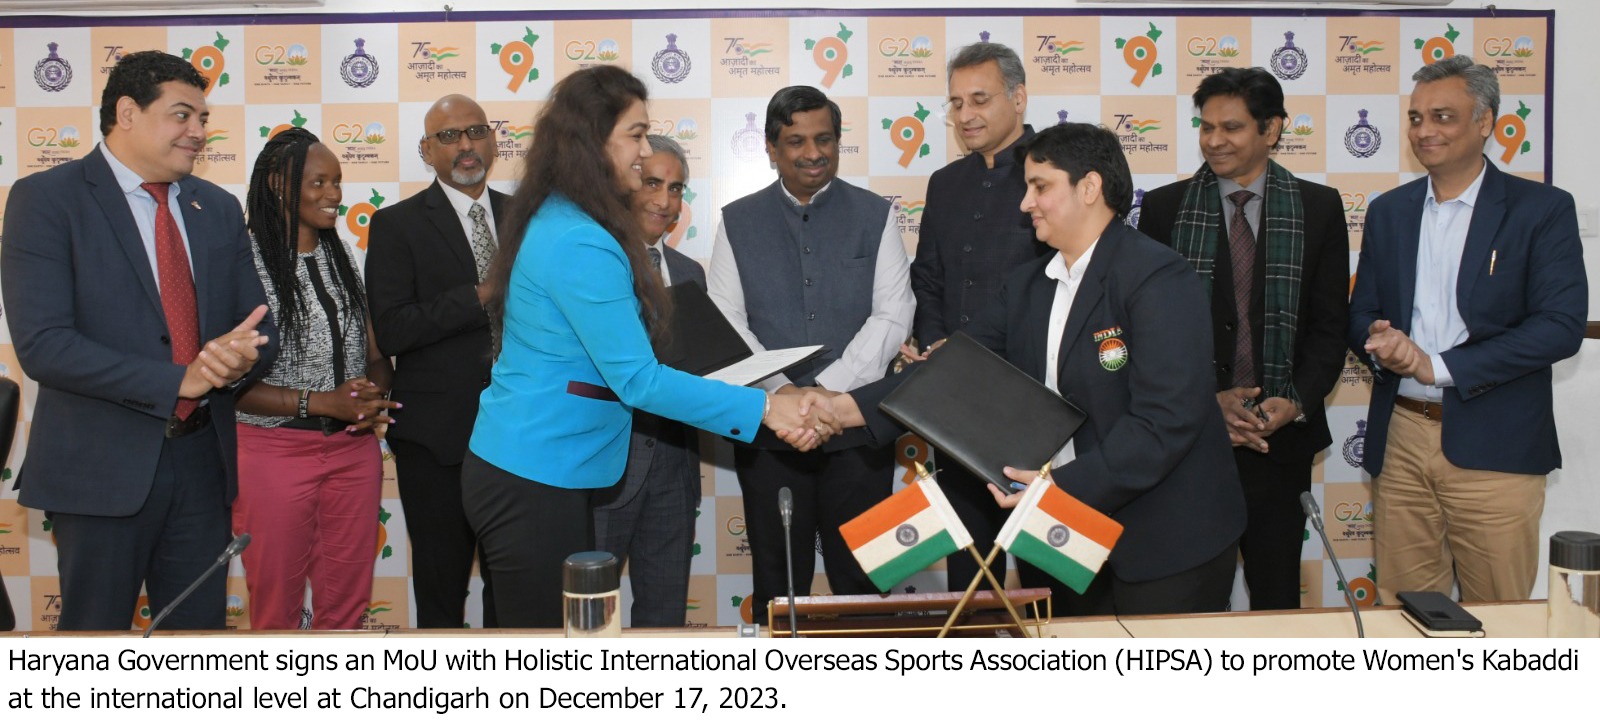 Haryana signs MoU with HIPSA for the development and promotion of Women Kabaddi